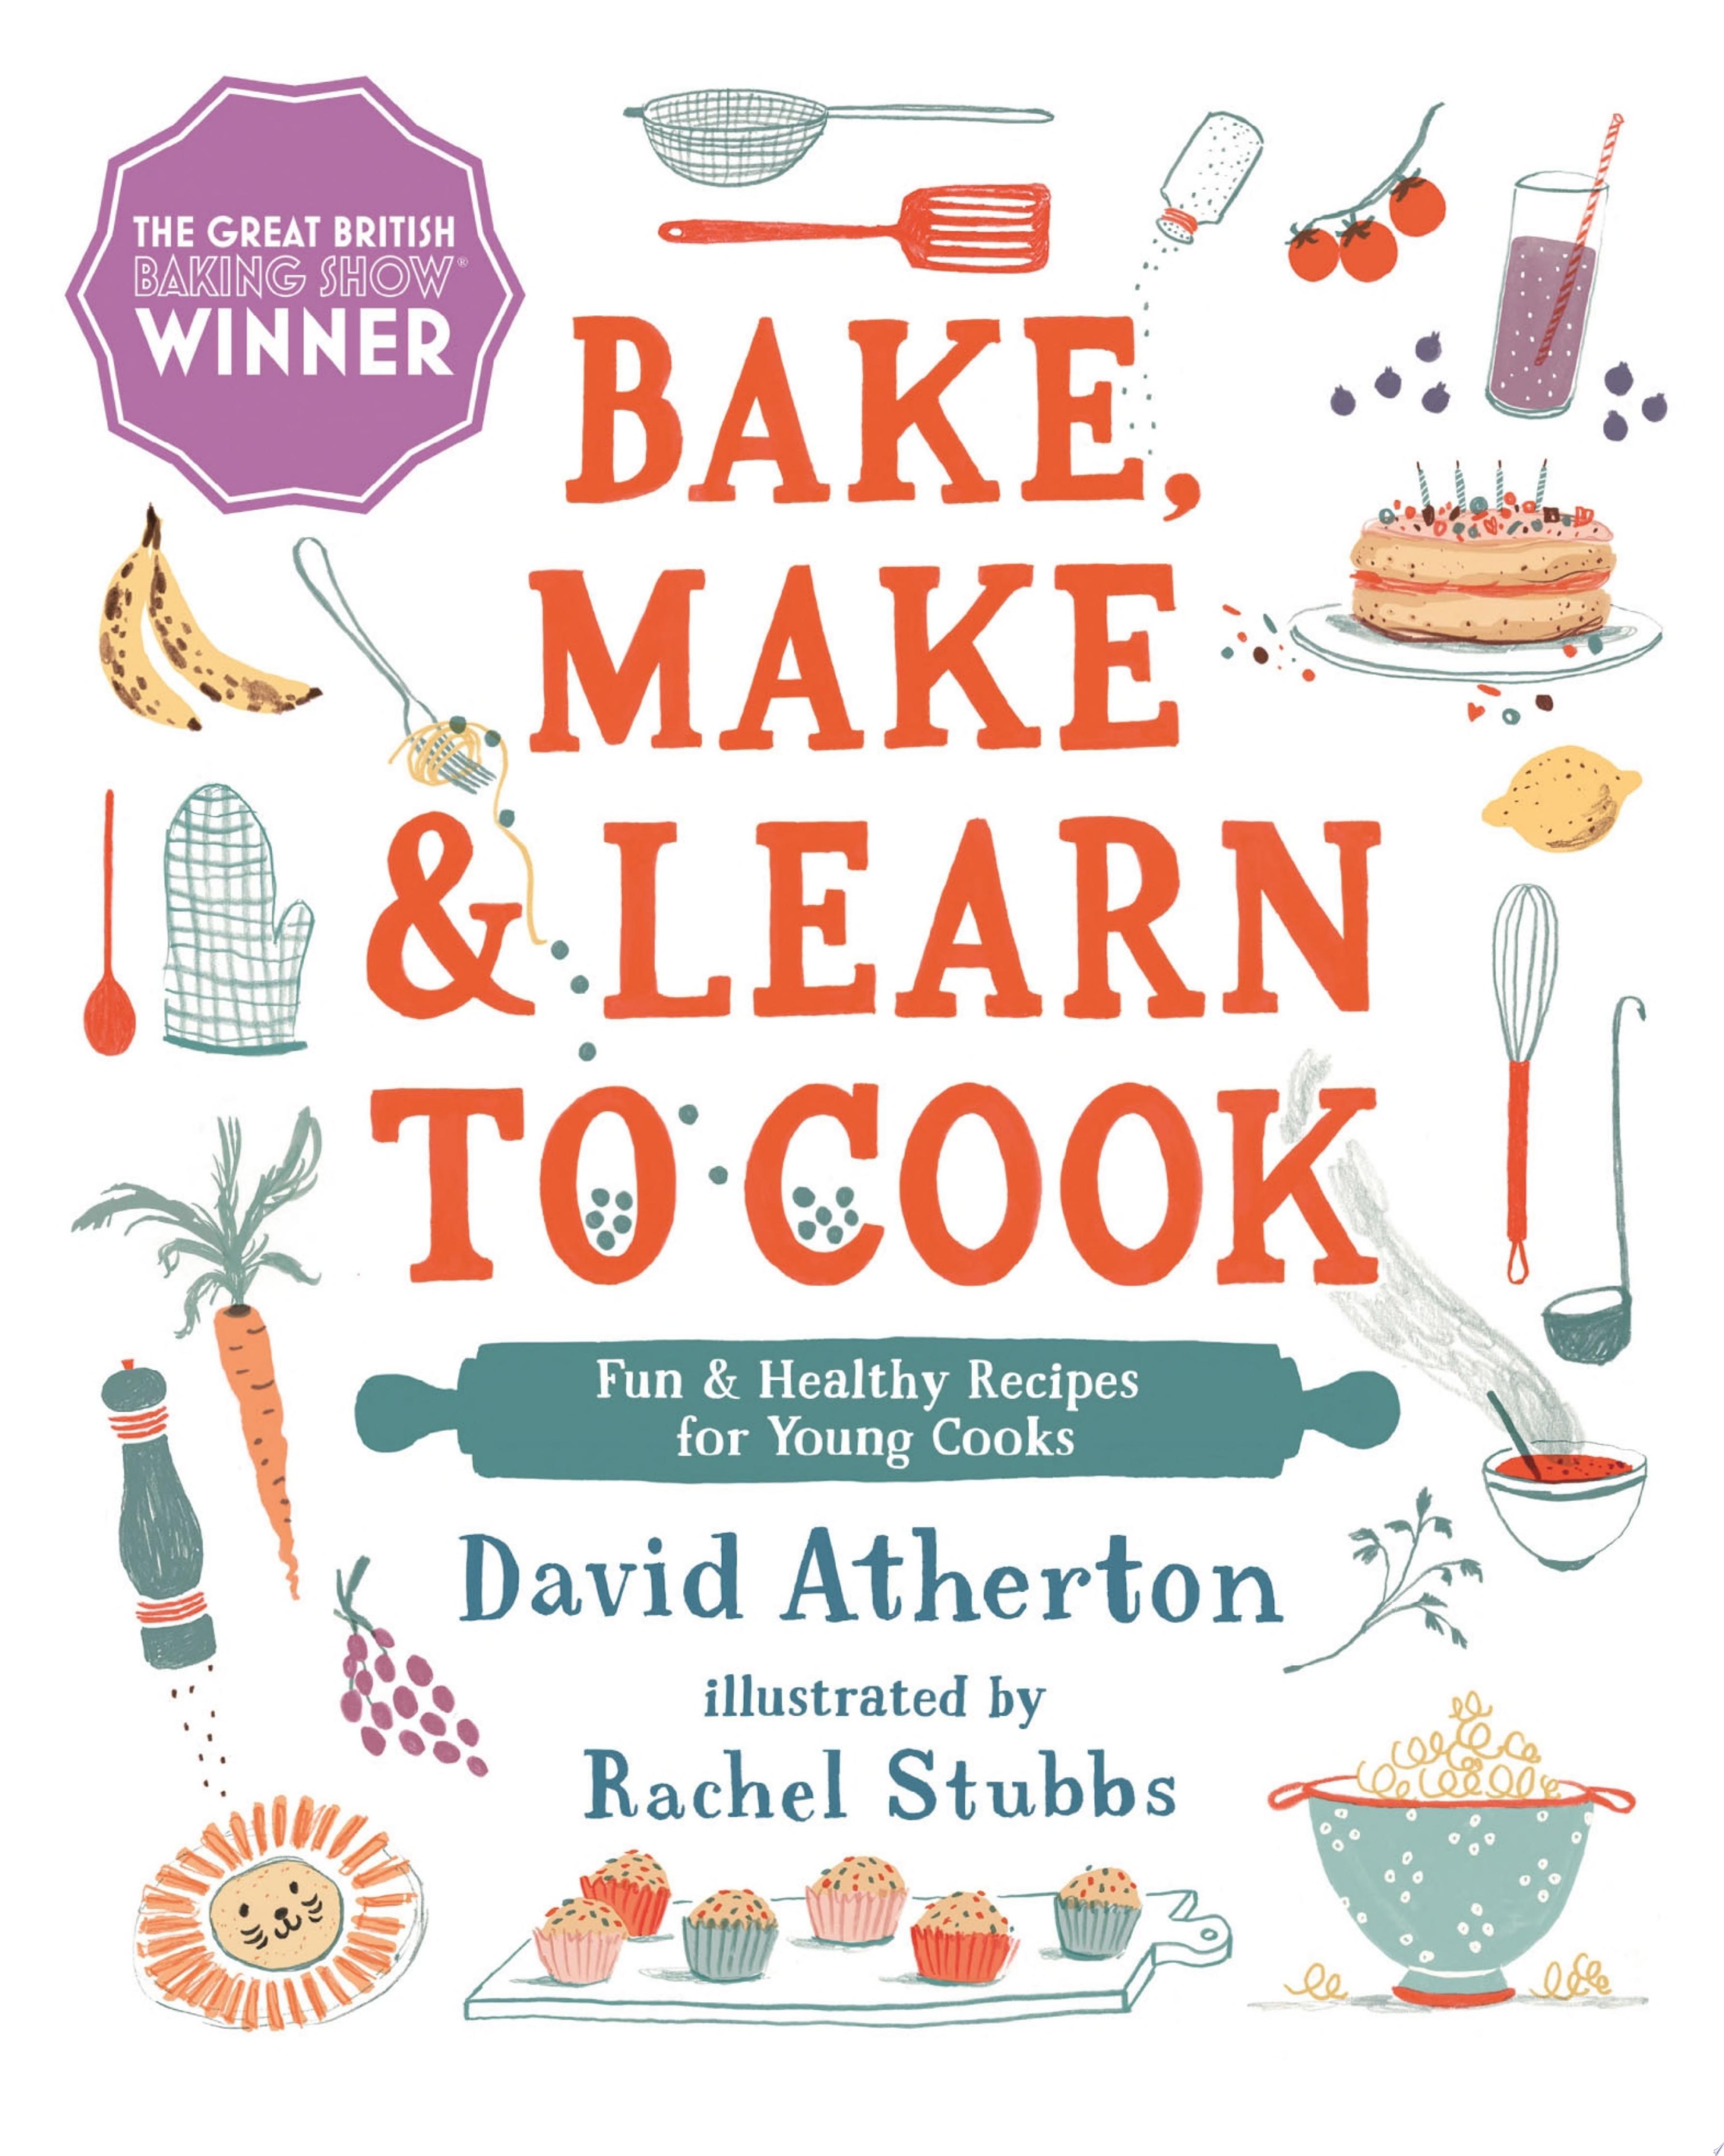 Image for "Bake, Make, and Learn to Cook: Fun and Healthy Recipes for Young Cooks"